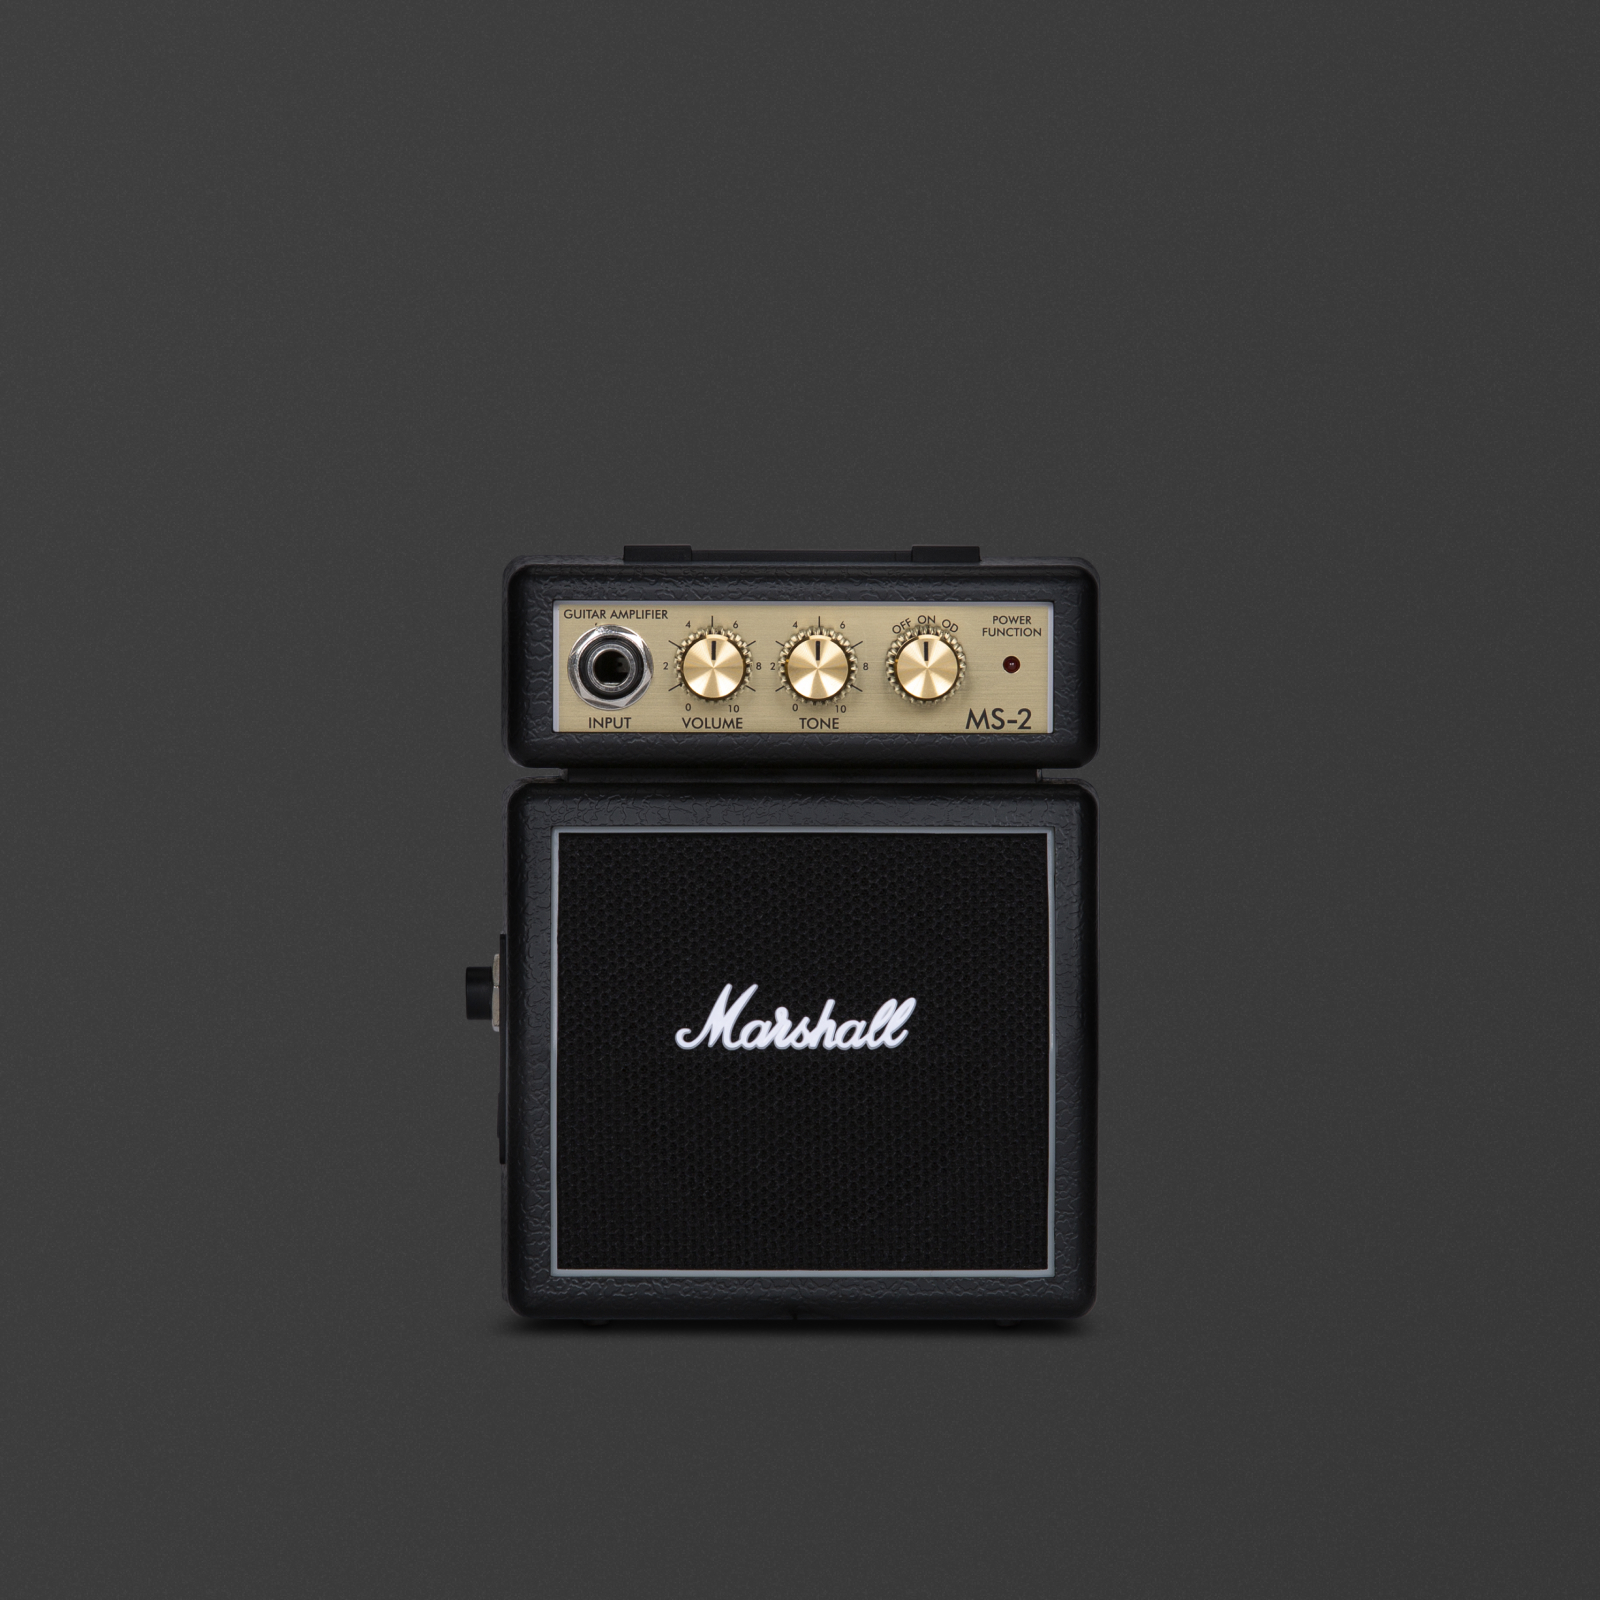 Small micro-amp in black color from Marshall